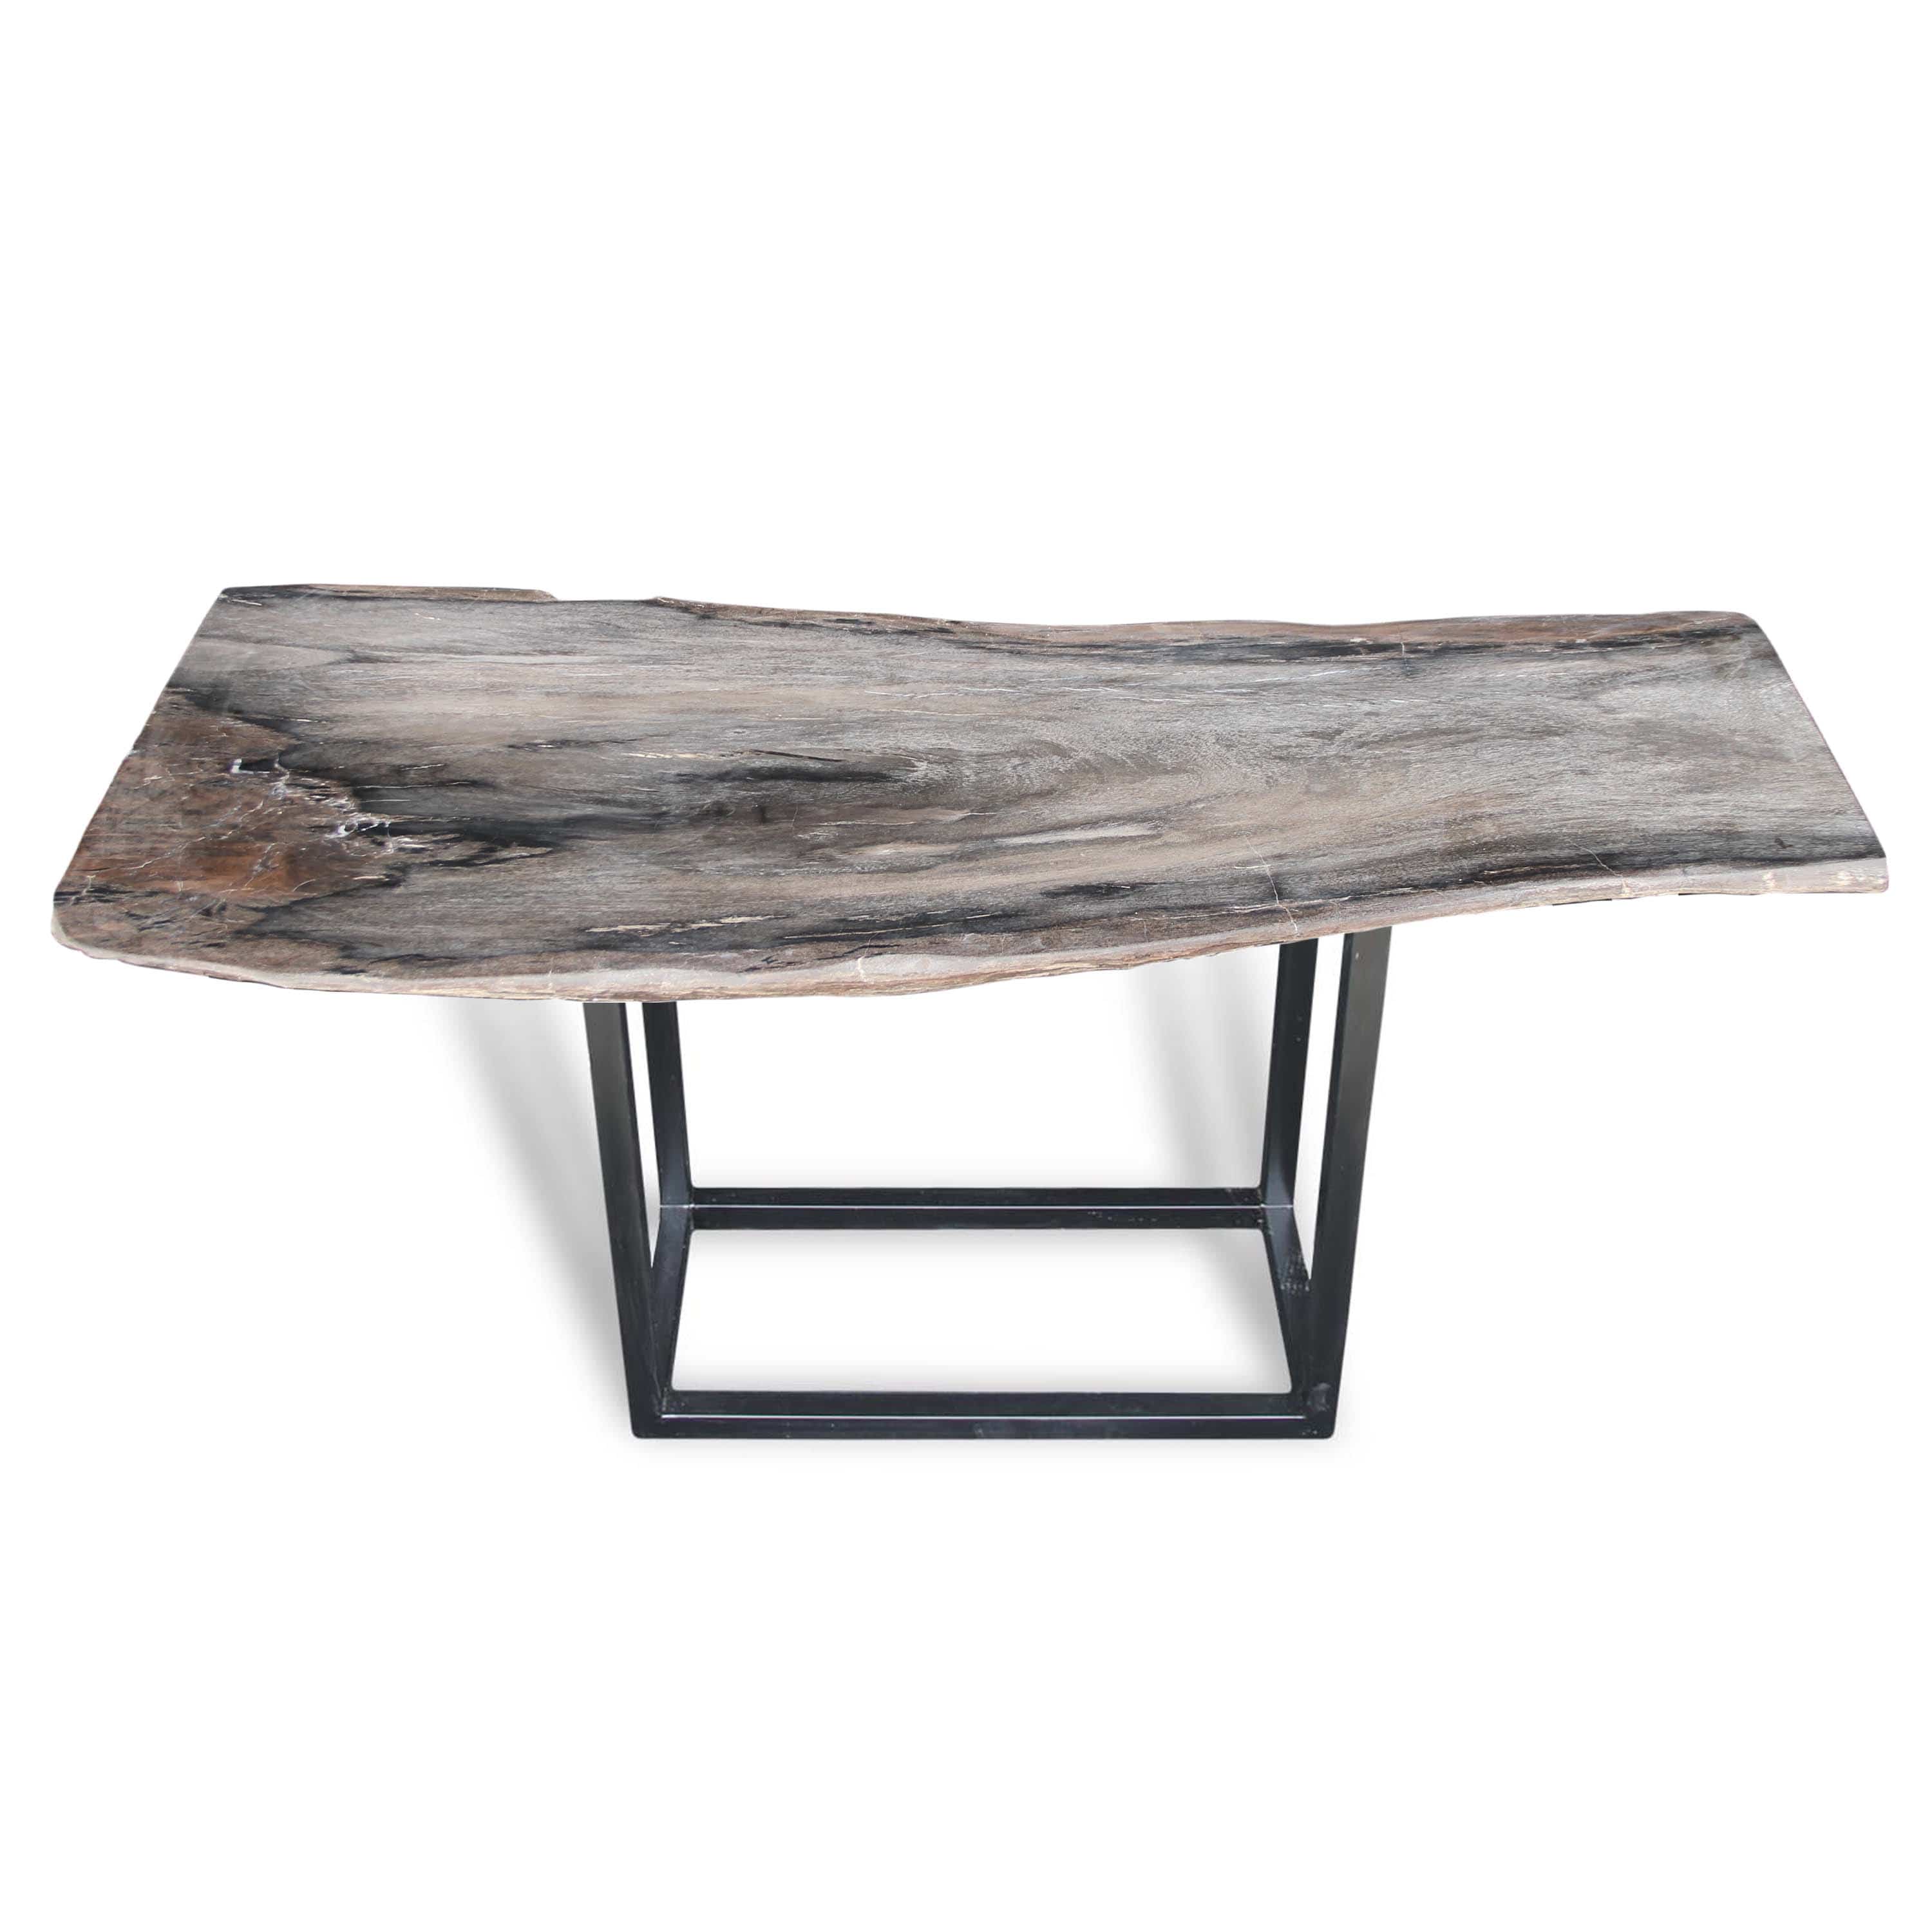 Kalifano Petrified Wood Natural Polished Petrified Wood Console Table from Indonesia - 47" / 88 lbs PWR4800.001